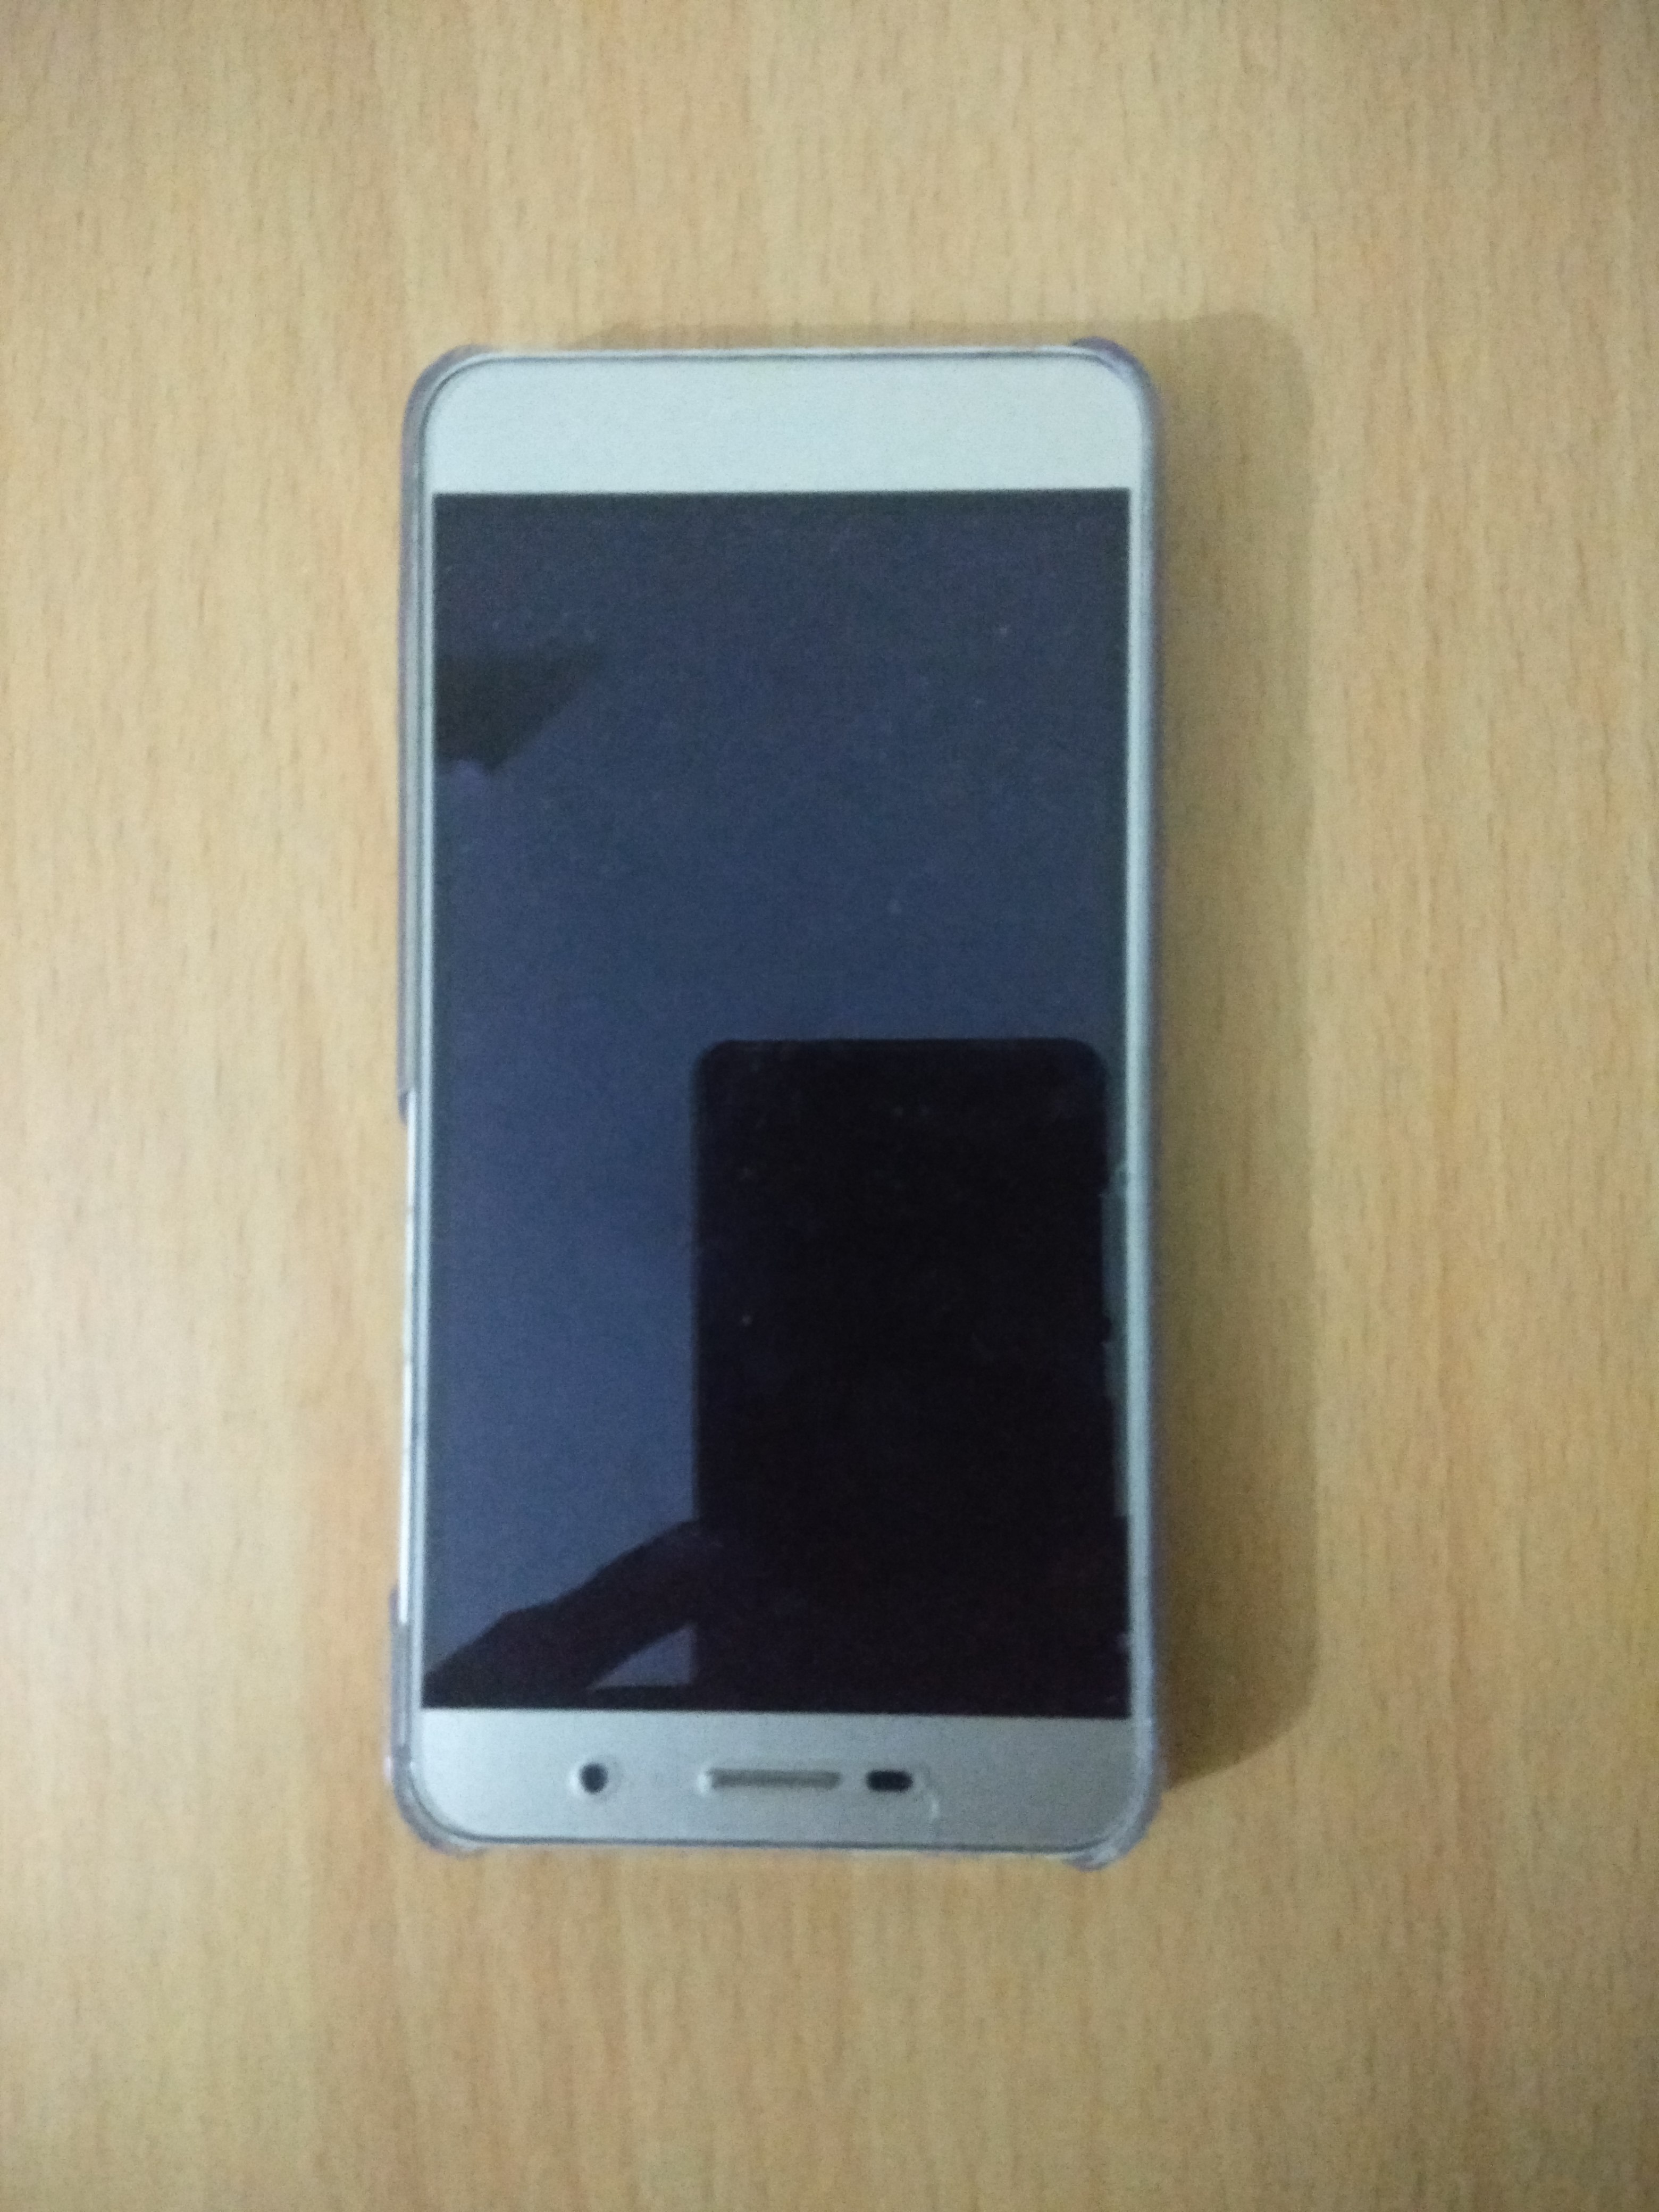 Huawei y6pro (honor) for sale in Areekode